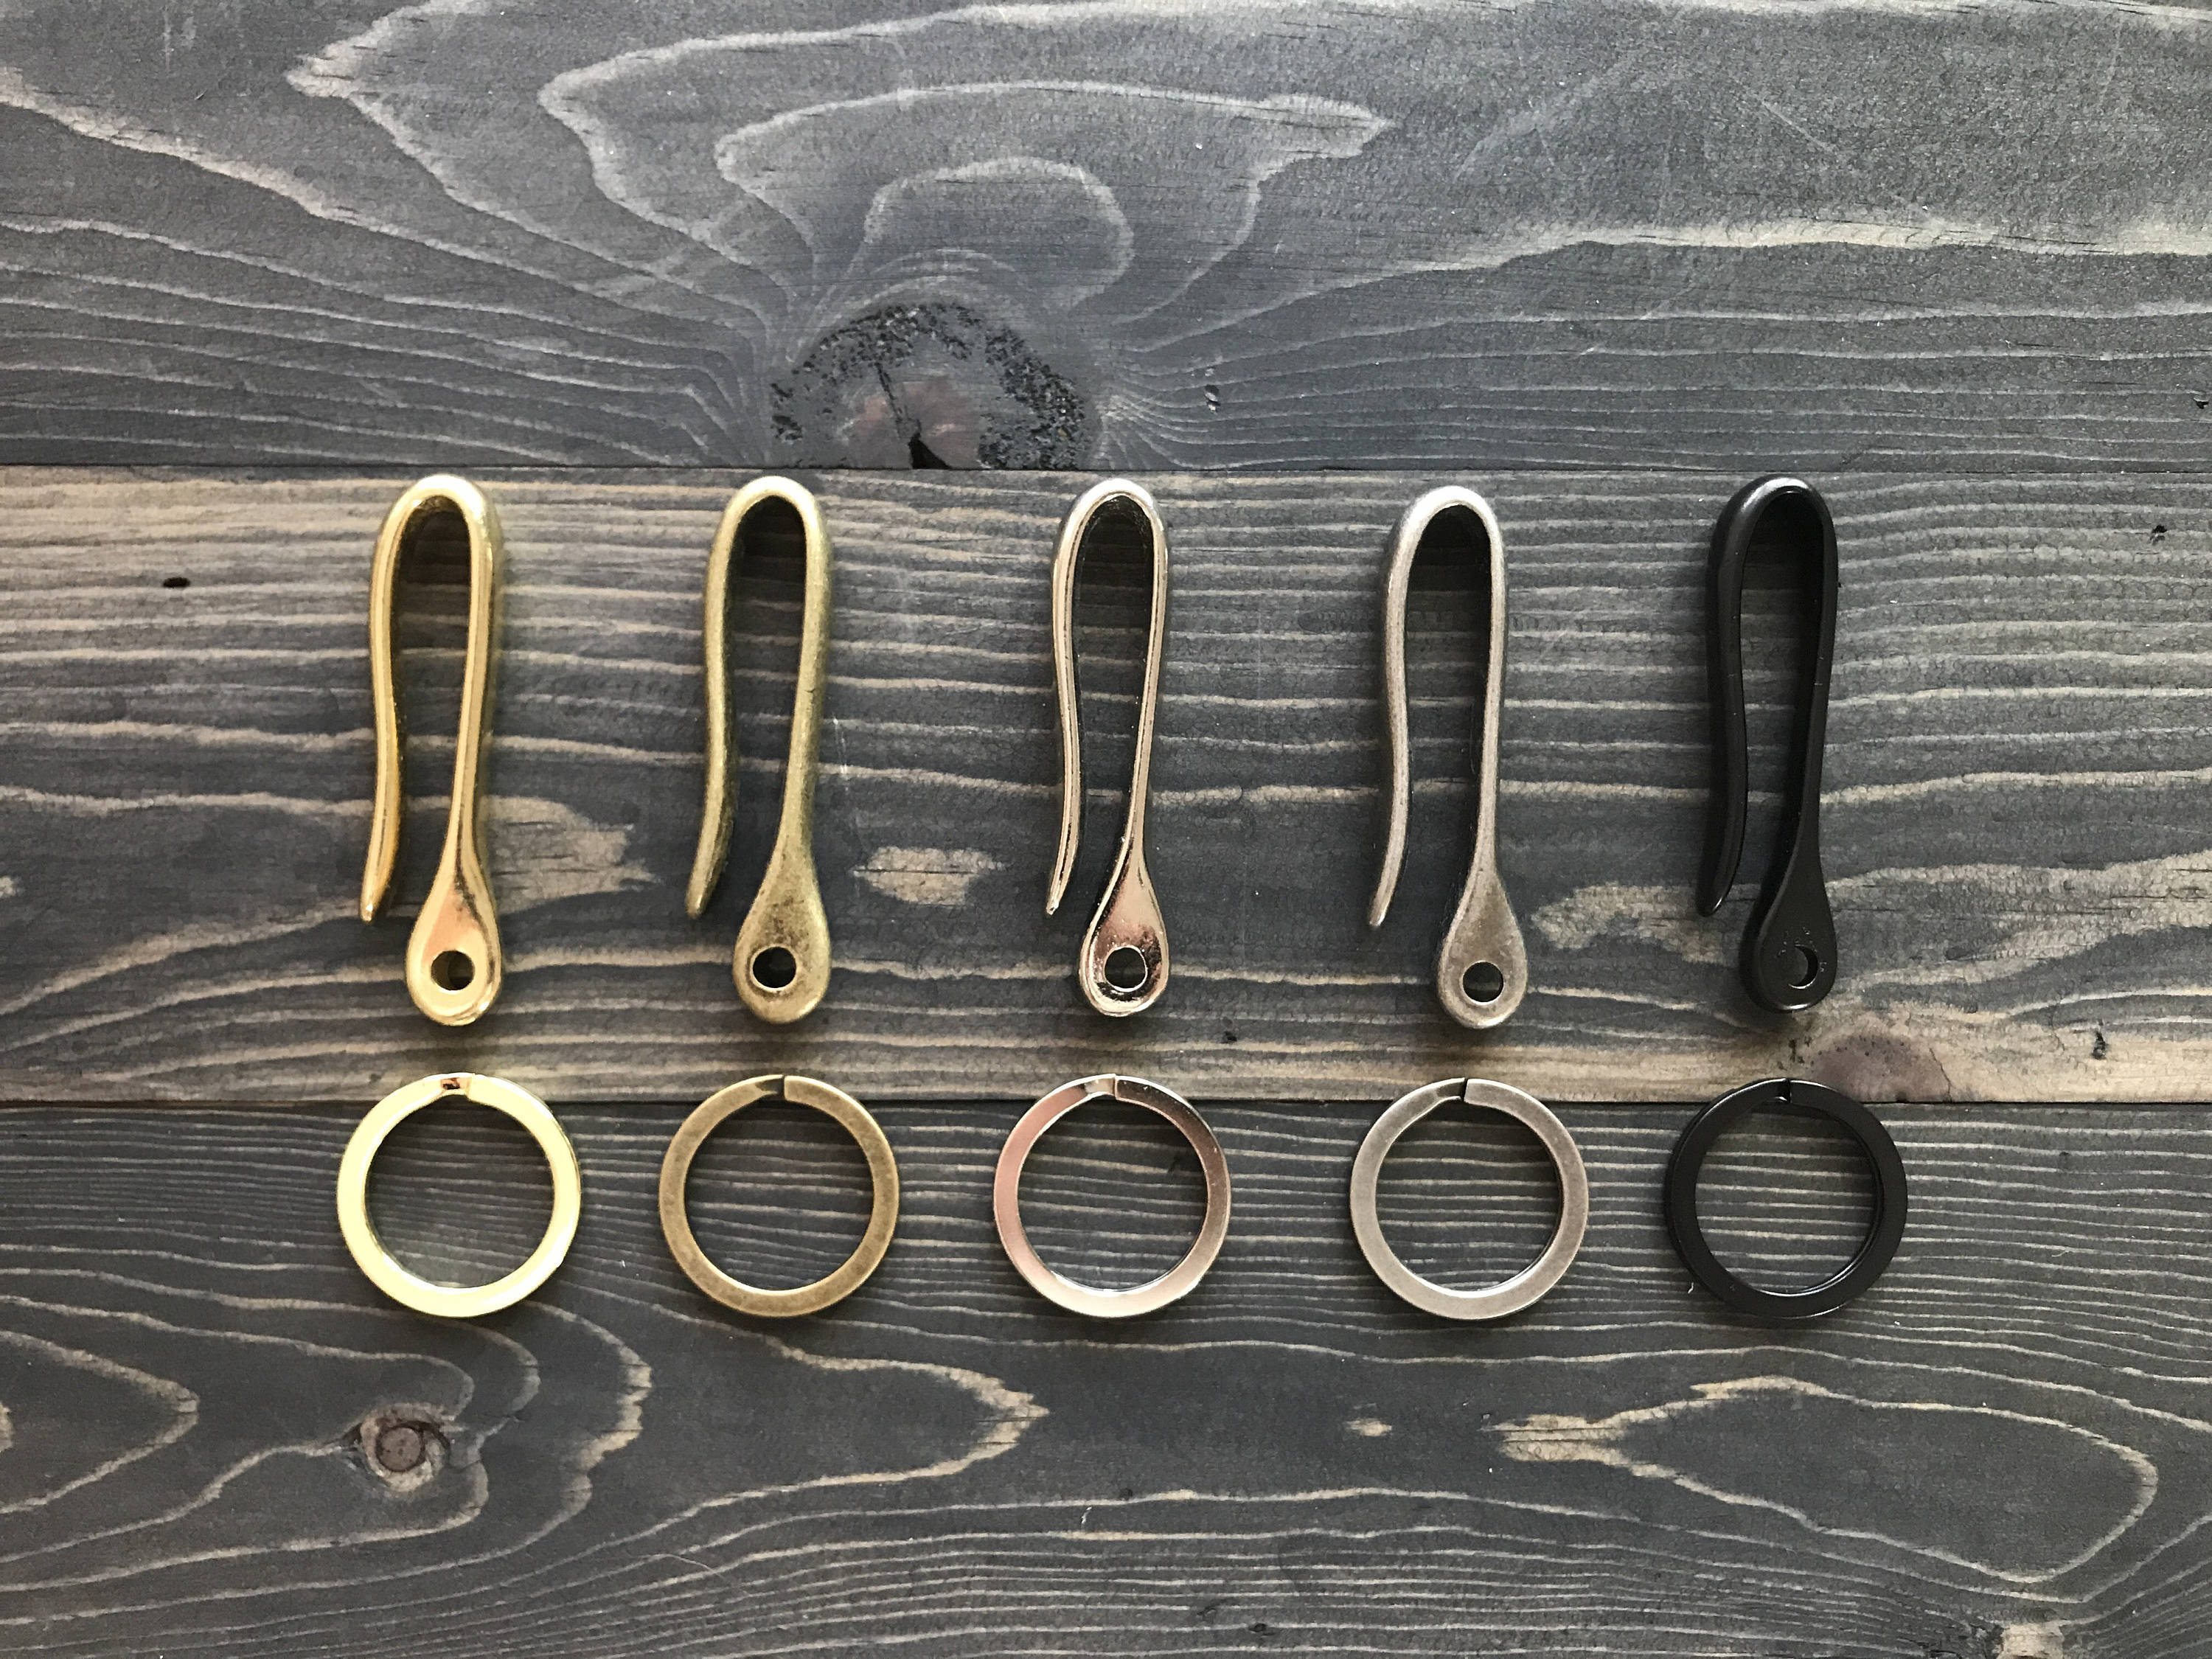 Craft and Lore Solid Brass Key Hook, Keychain Fish Hook Copper / Horween Shell Cordovan +8